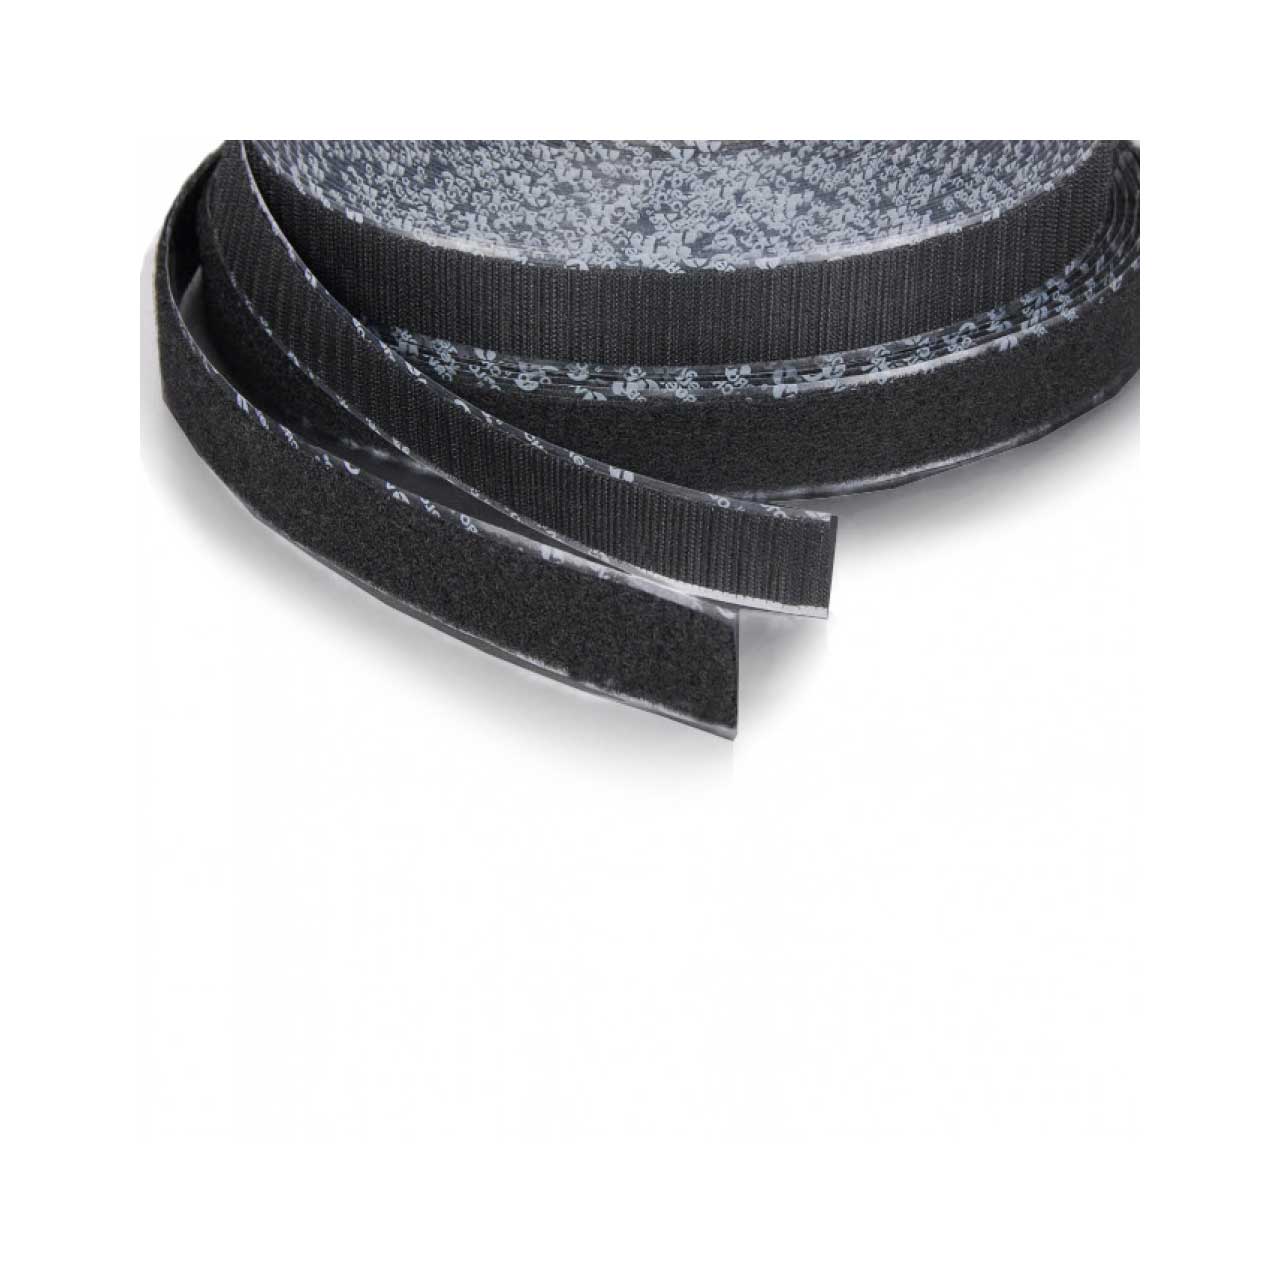 VELCRO® Brand 189453 Tape On A Roll Pressure Sensitive Rubber Adhesive Hook  - 1 Inch x 25 Yard - Black